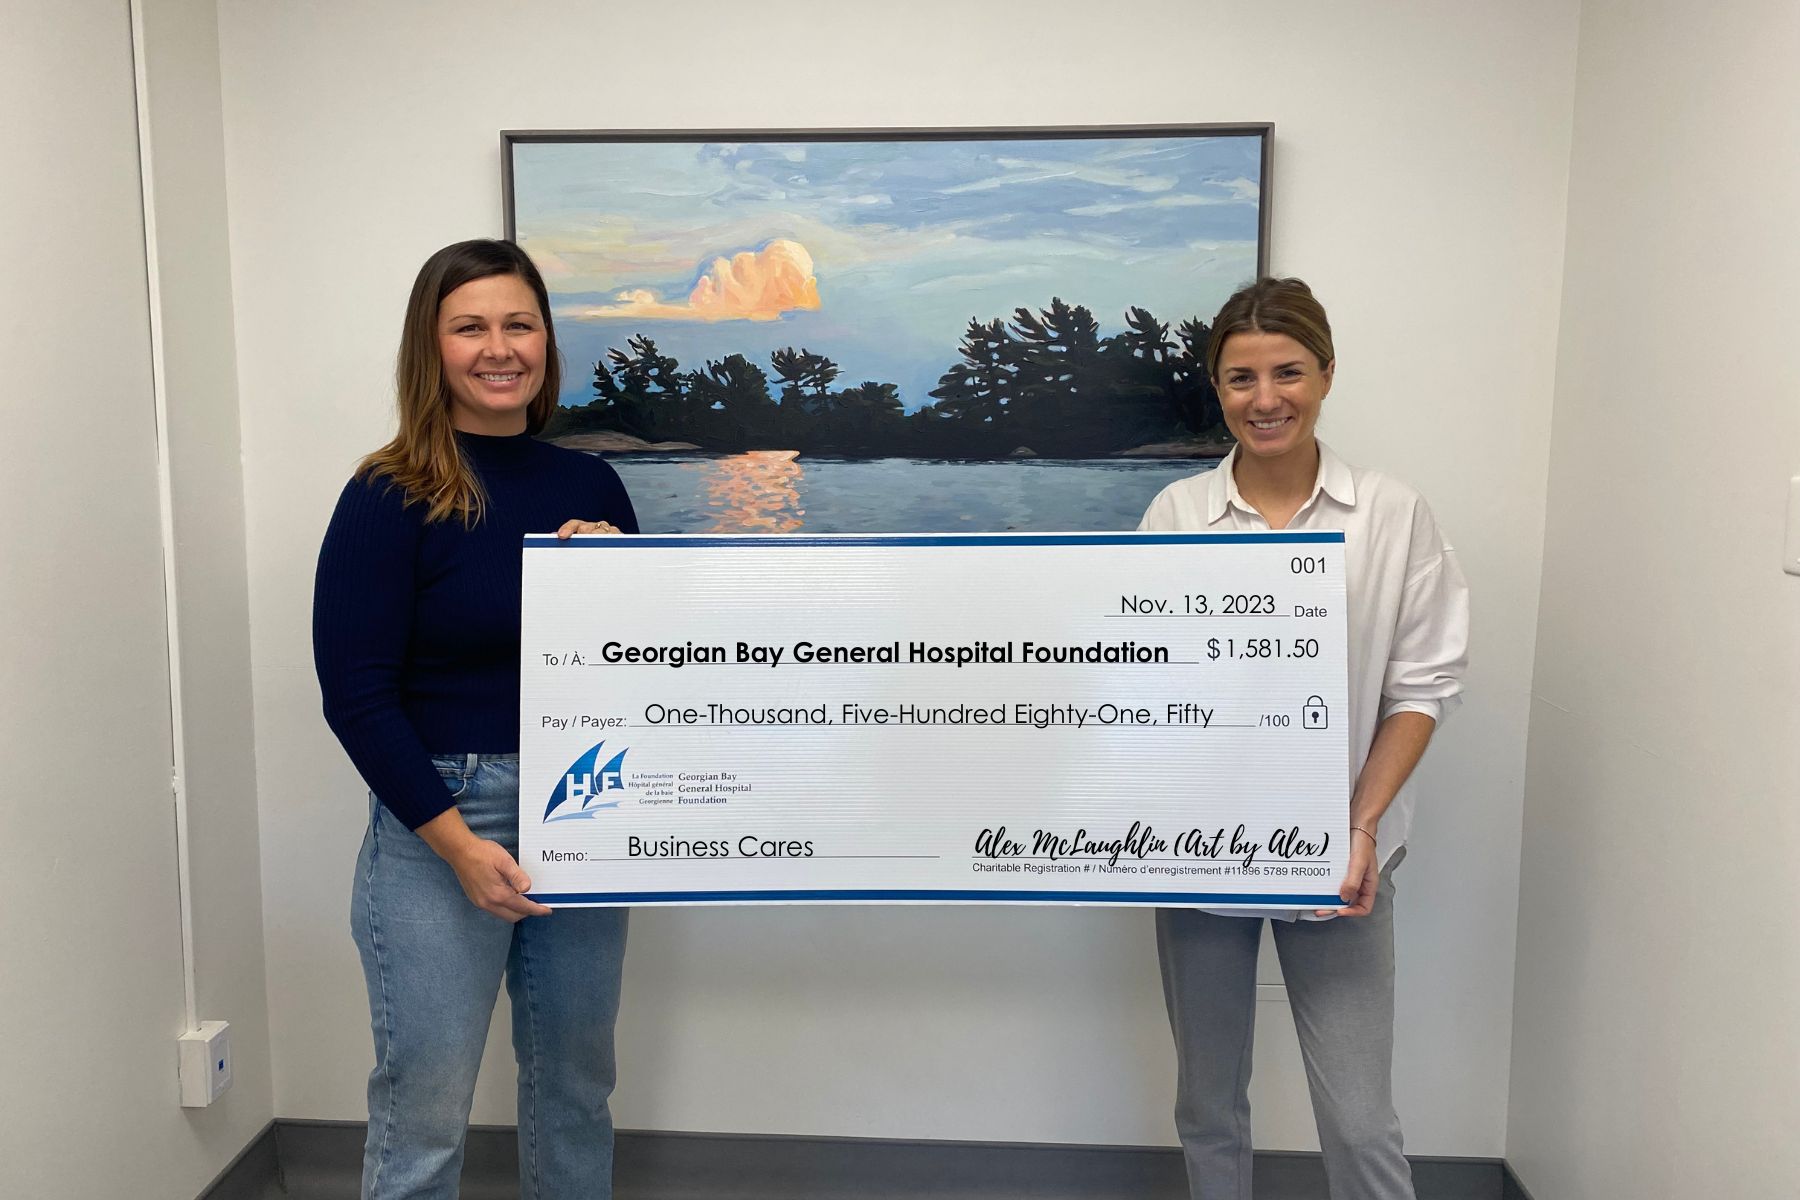 Two women hold a giant cheque for GBGH Foundation for $1,581,50 from Alex McLaughlin - Art by Alex